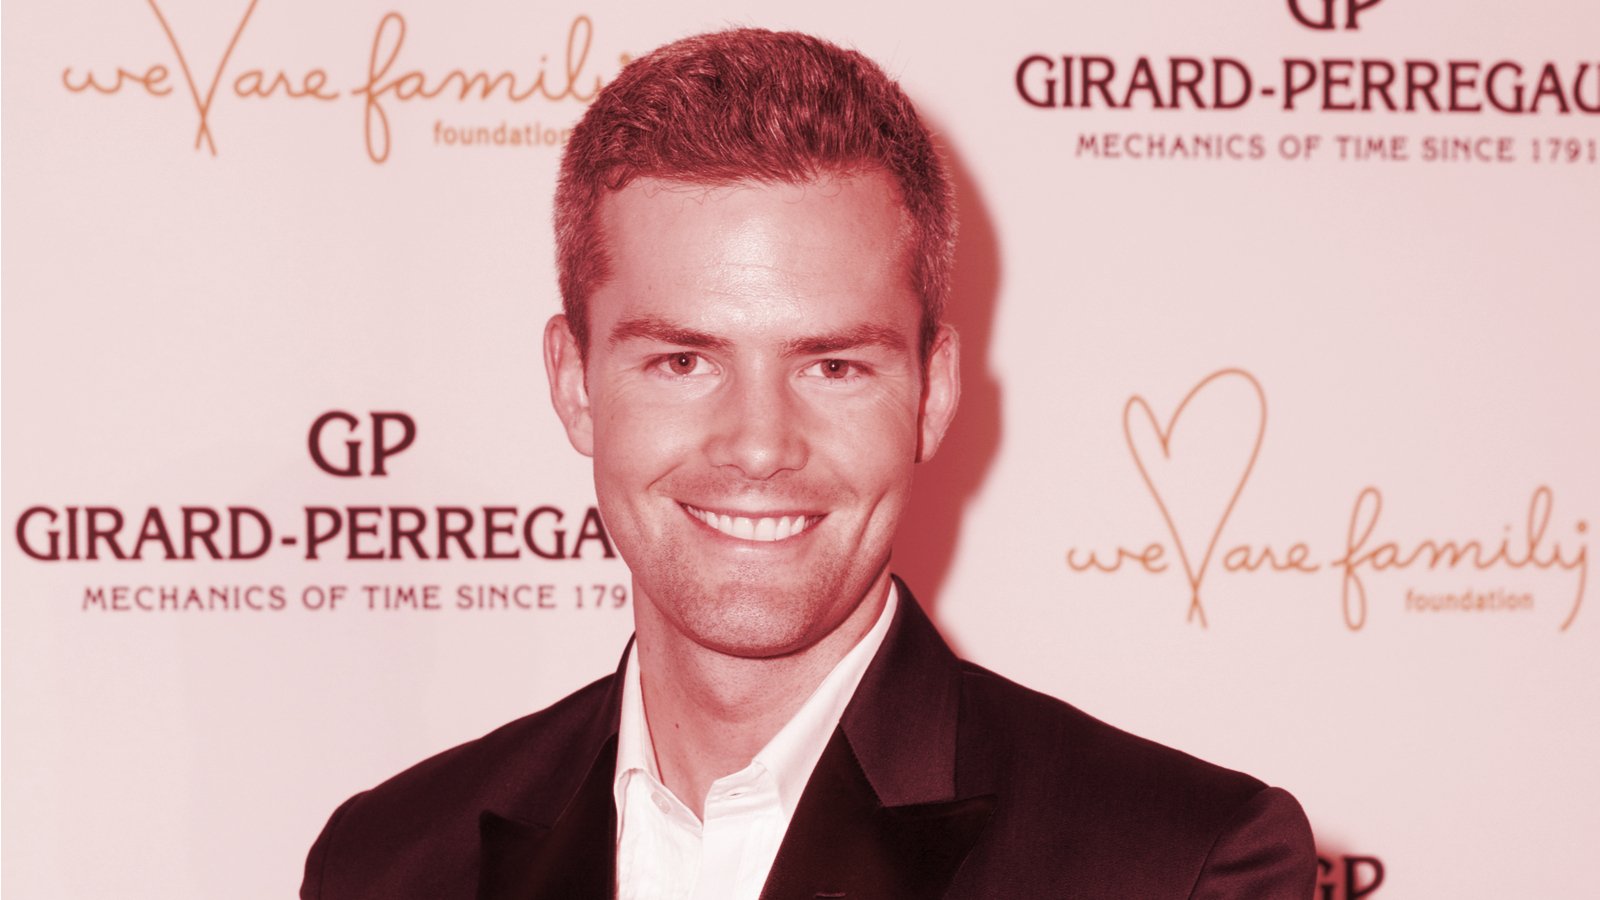 Celebrity Realtor Ryan Serhant: 50% of Real Estate Transactions Will Be in Crypto